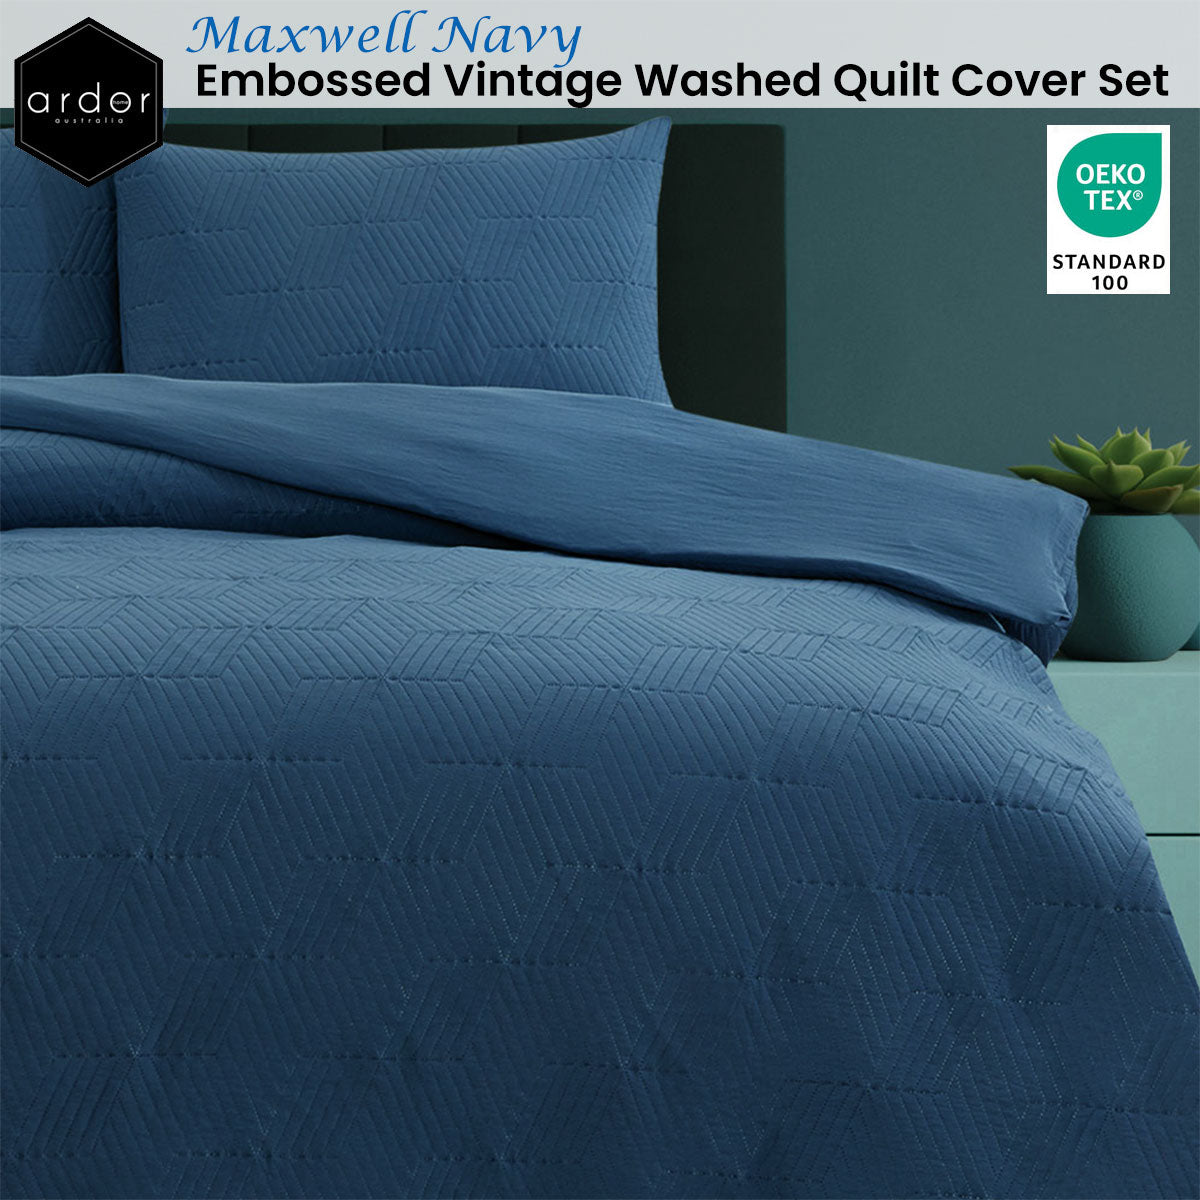 Ardor Maxwell Navy Embossed Vintage Washed King Size Quilt Cover Set